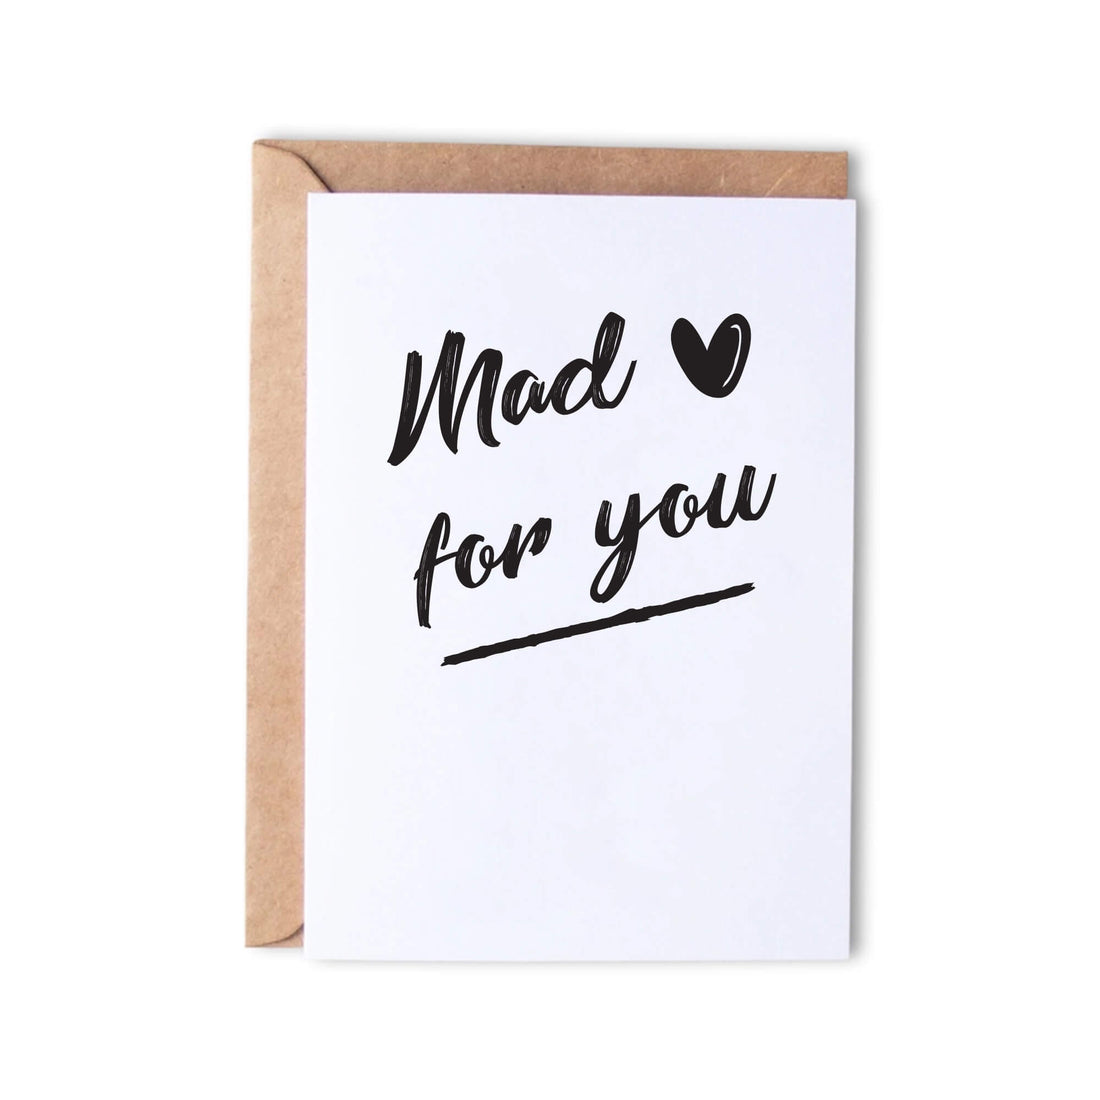 Mad love for you - Monk Designs